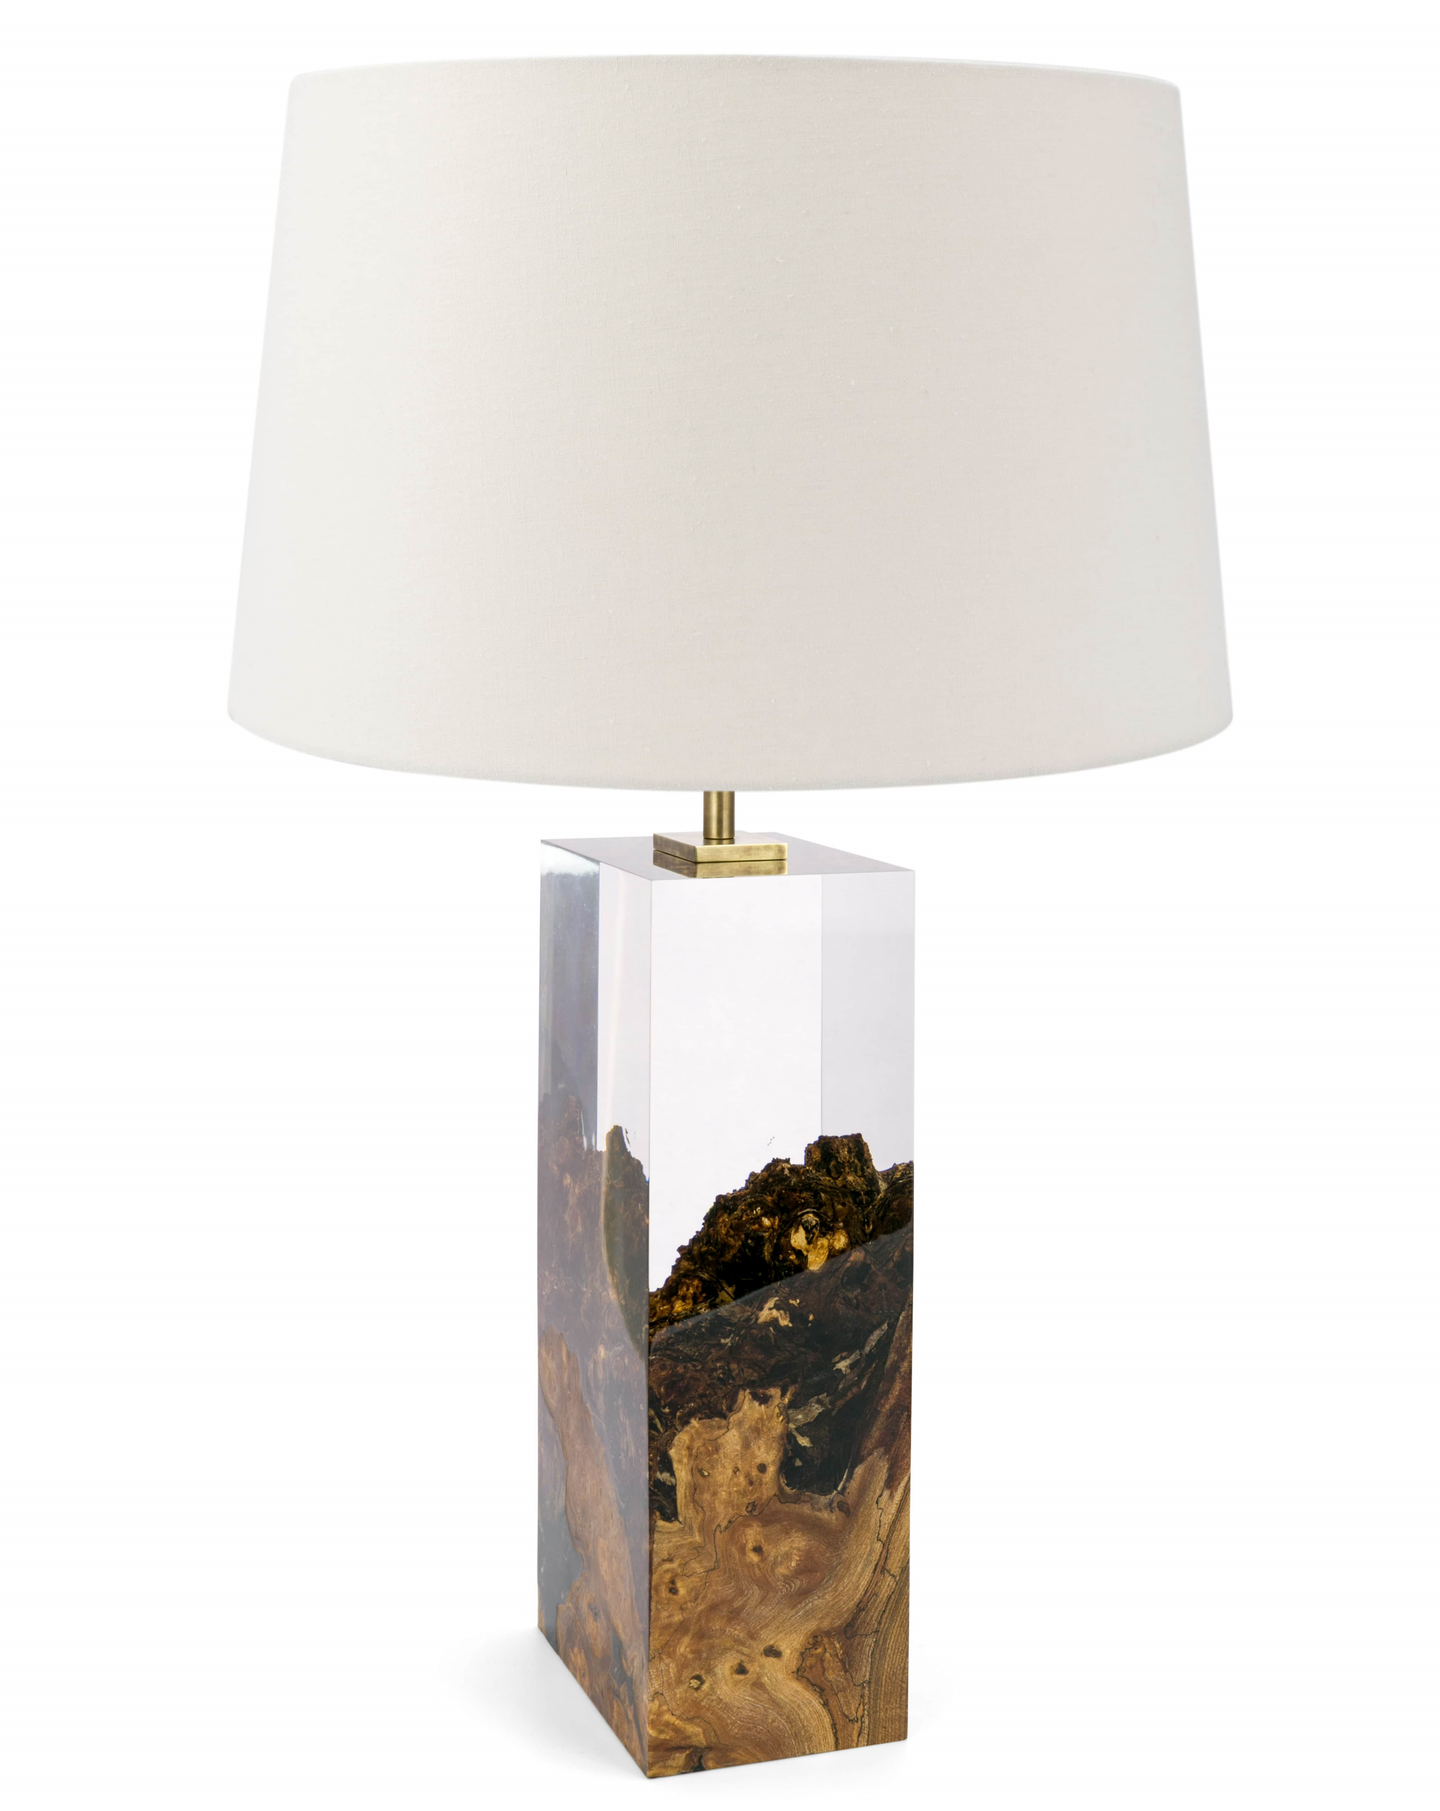 Elm and Acrylic Table Lamp made by Iluka London for AUTHOR: home of British-made furniture and decor